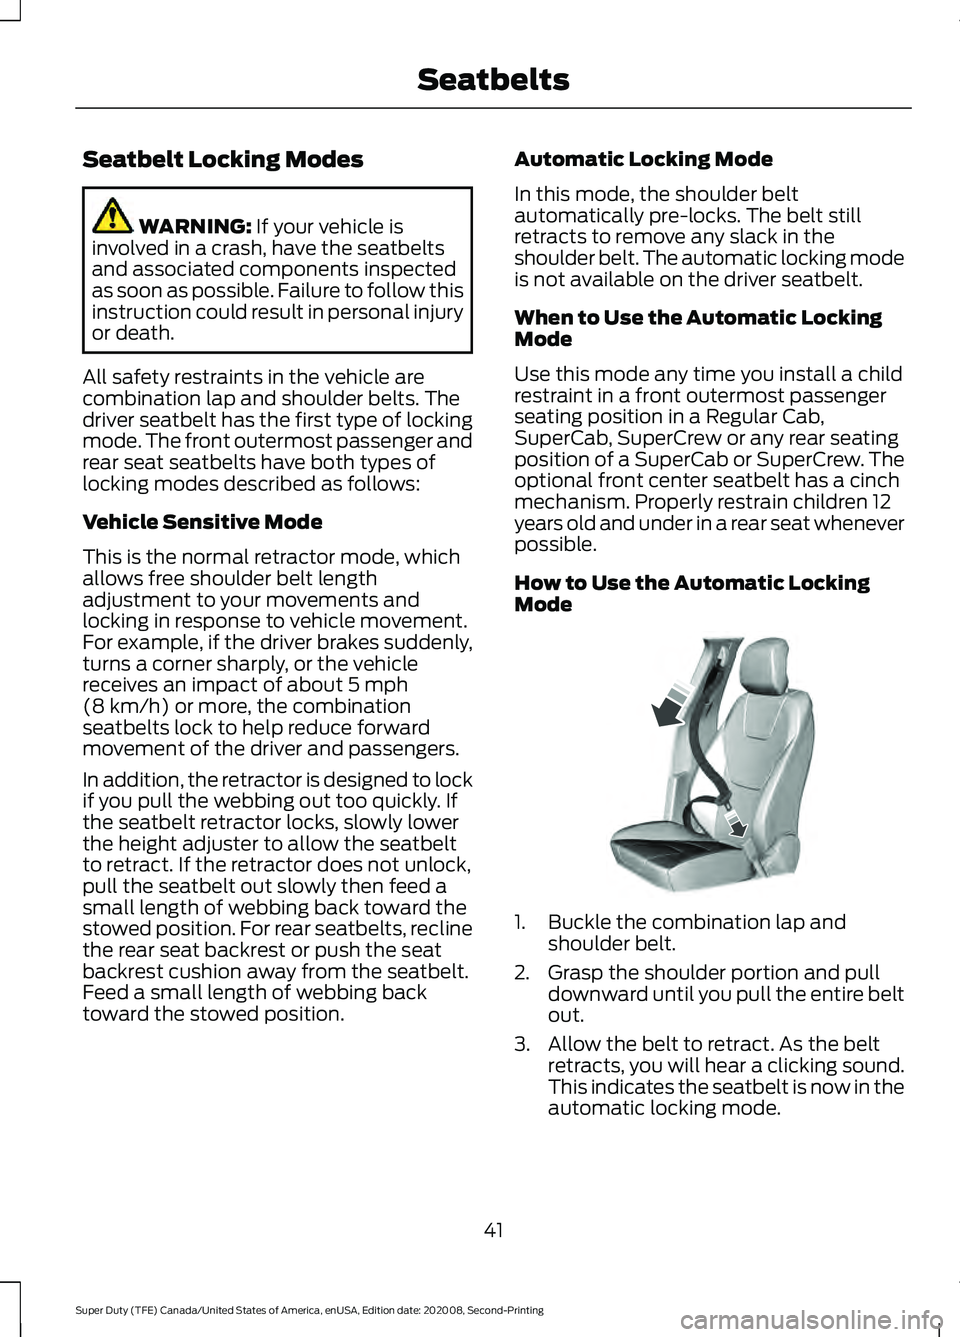 FORD SUPER DUTY 2021  Owners Manual Seatbelt Locking Modes
WARNING: If your vehicle is
involved in a crash, have the seatbelts
and associated components inspected
as soon as possible. Failure to follow this
instruction could result in p